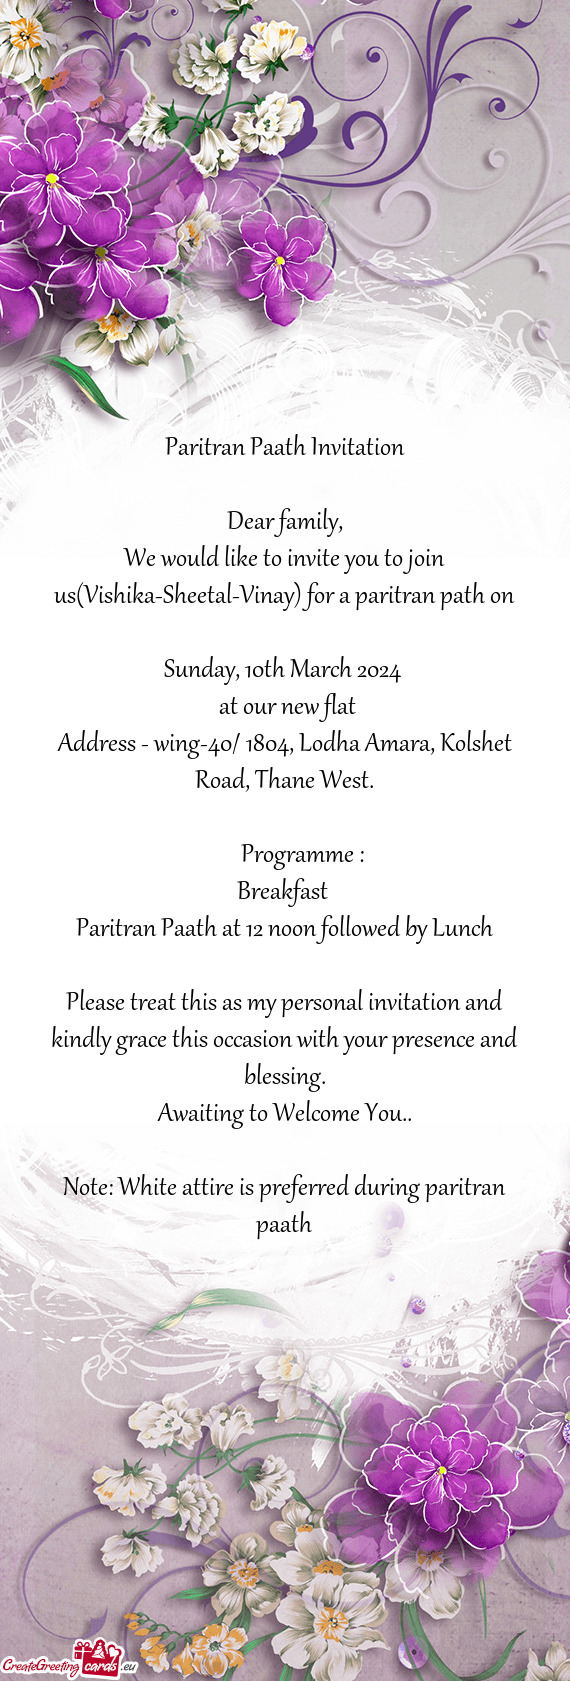 We would like to invite you to join us(Vishika-Sheetal-Vinay) for a paritran path on